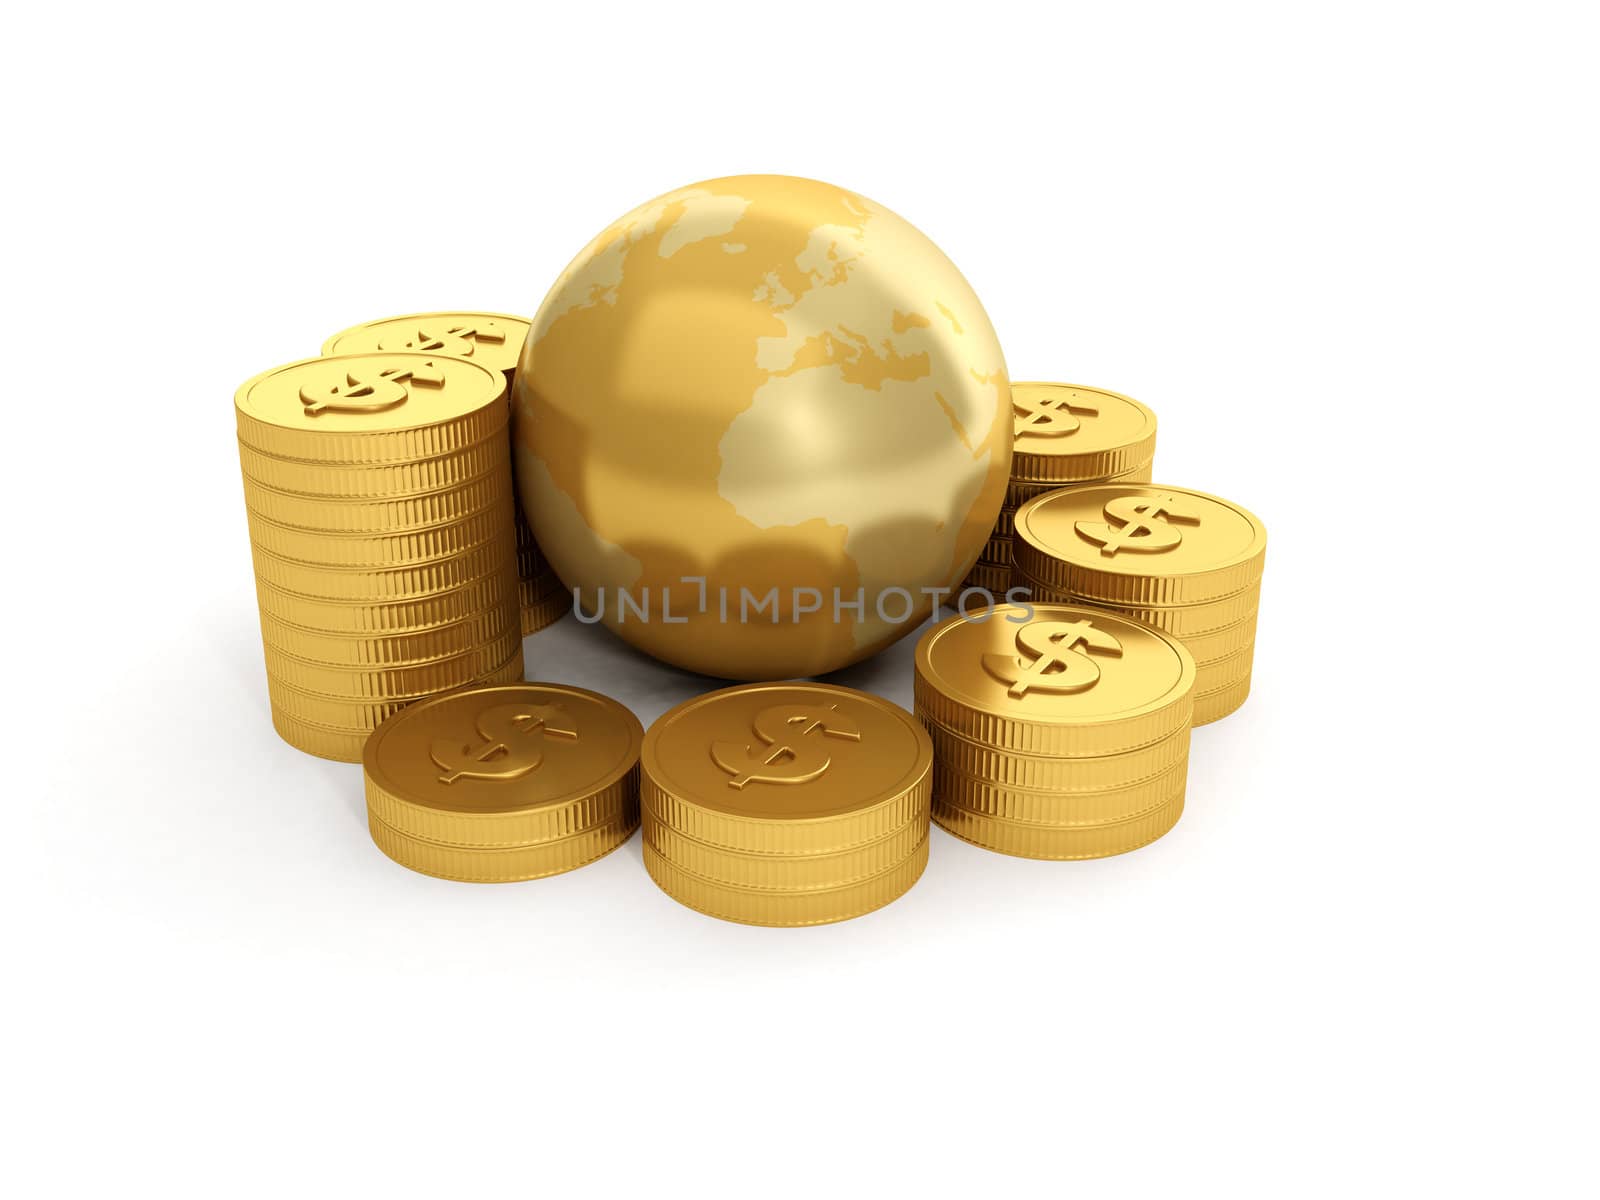 3d illustration: Land and a group of gold coins on a white backg by kolobsek